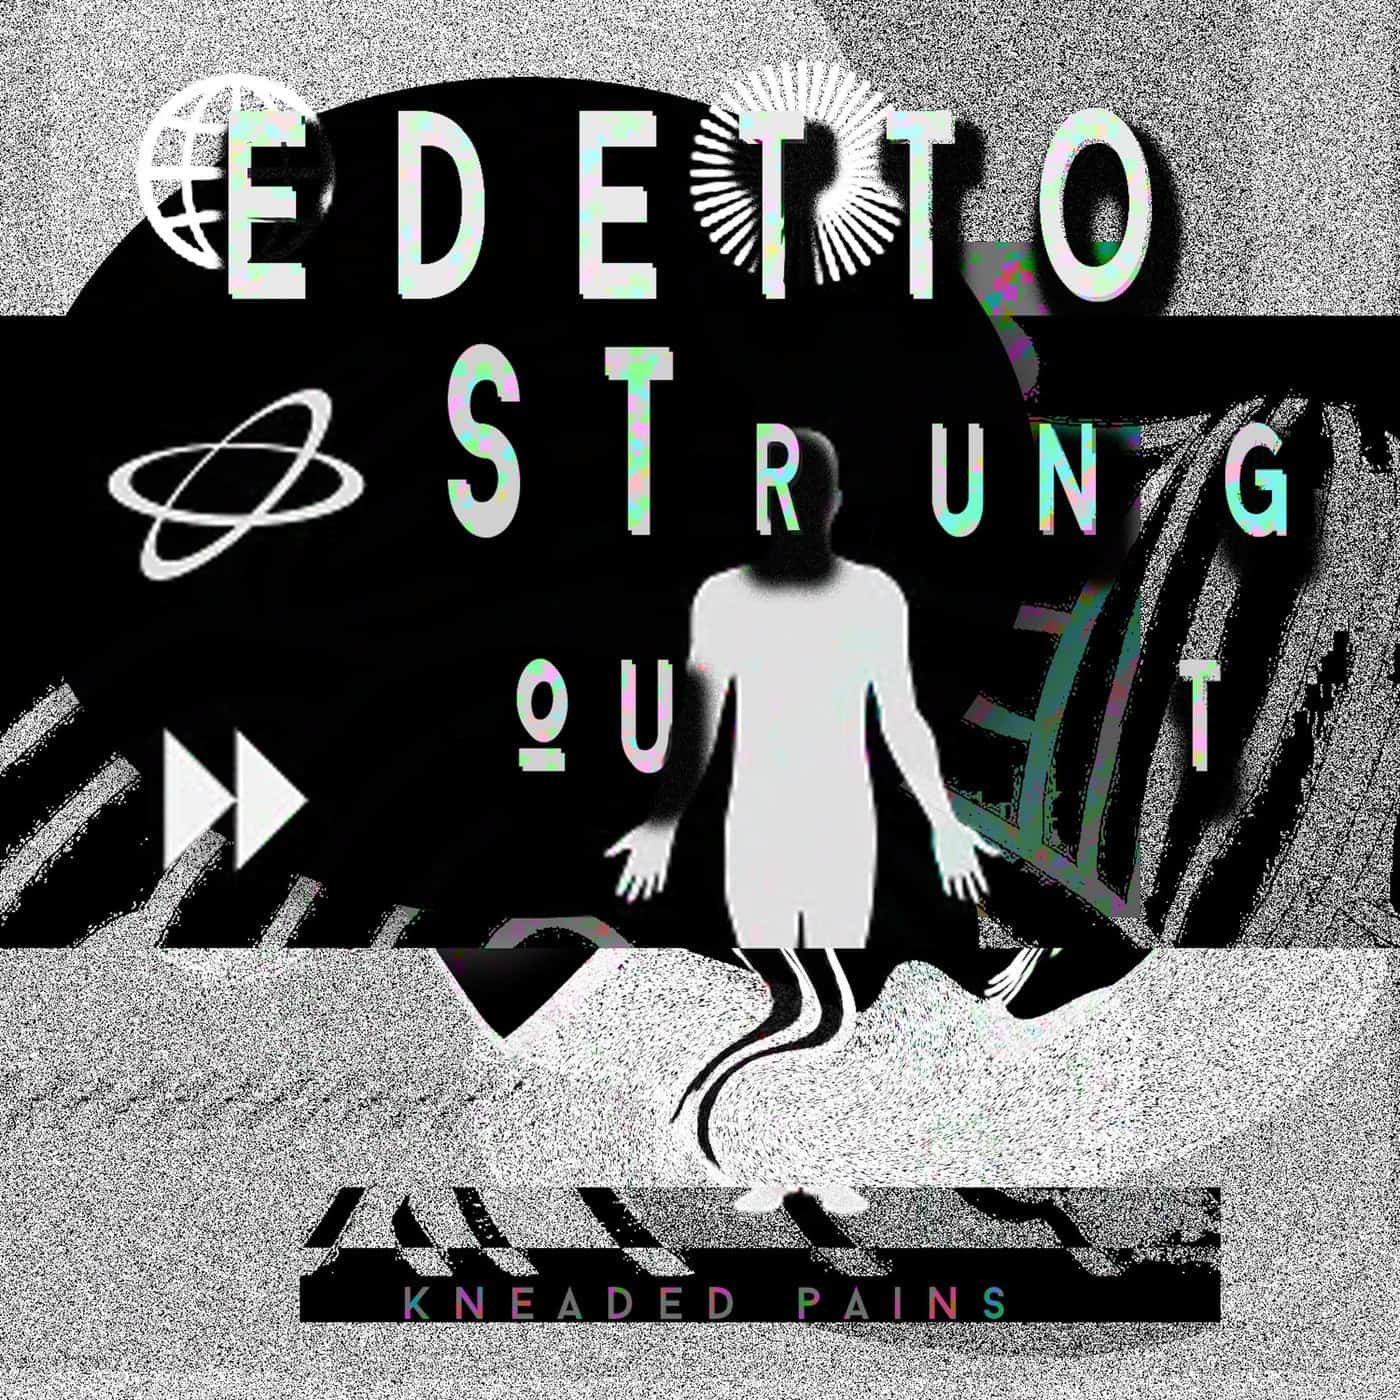 image cover: edetto - Strung Out EP / KP144